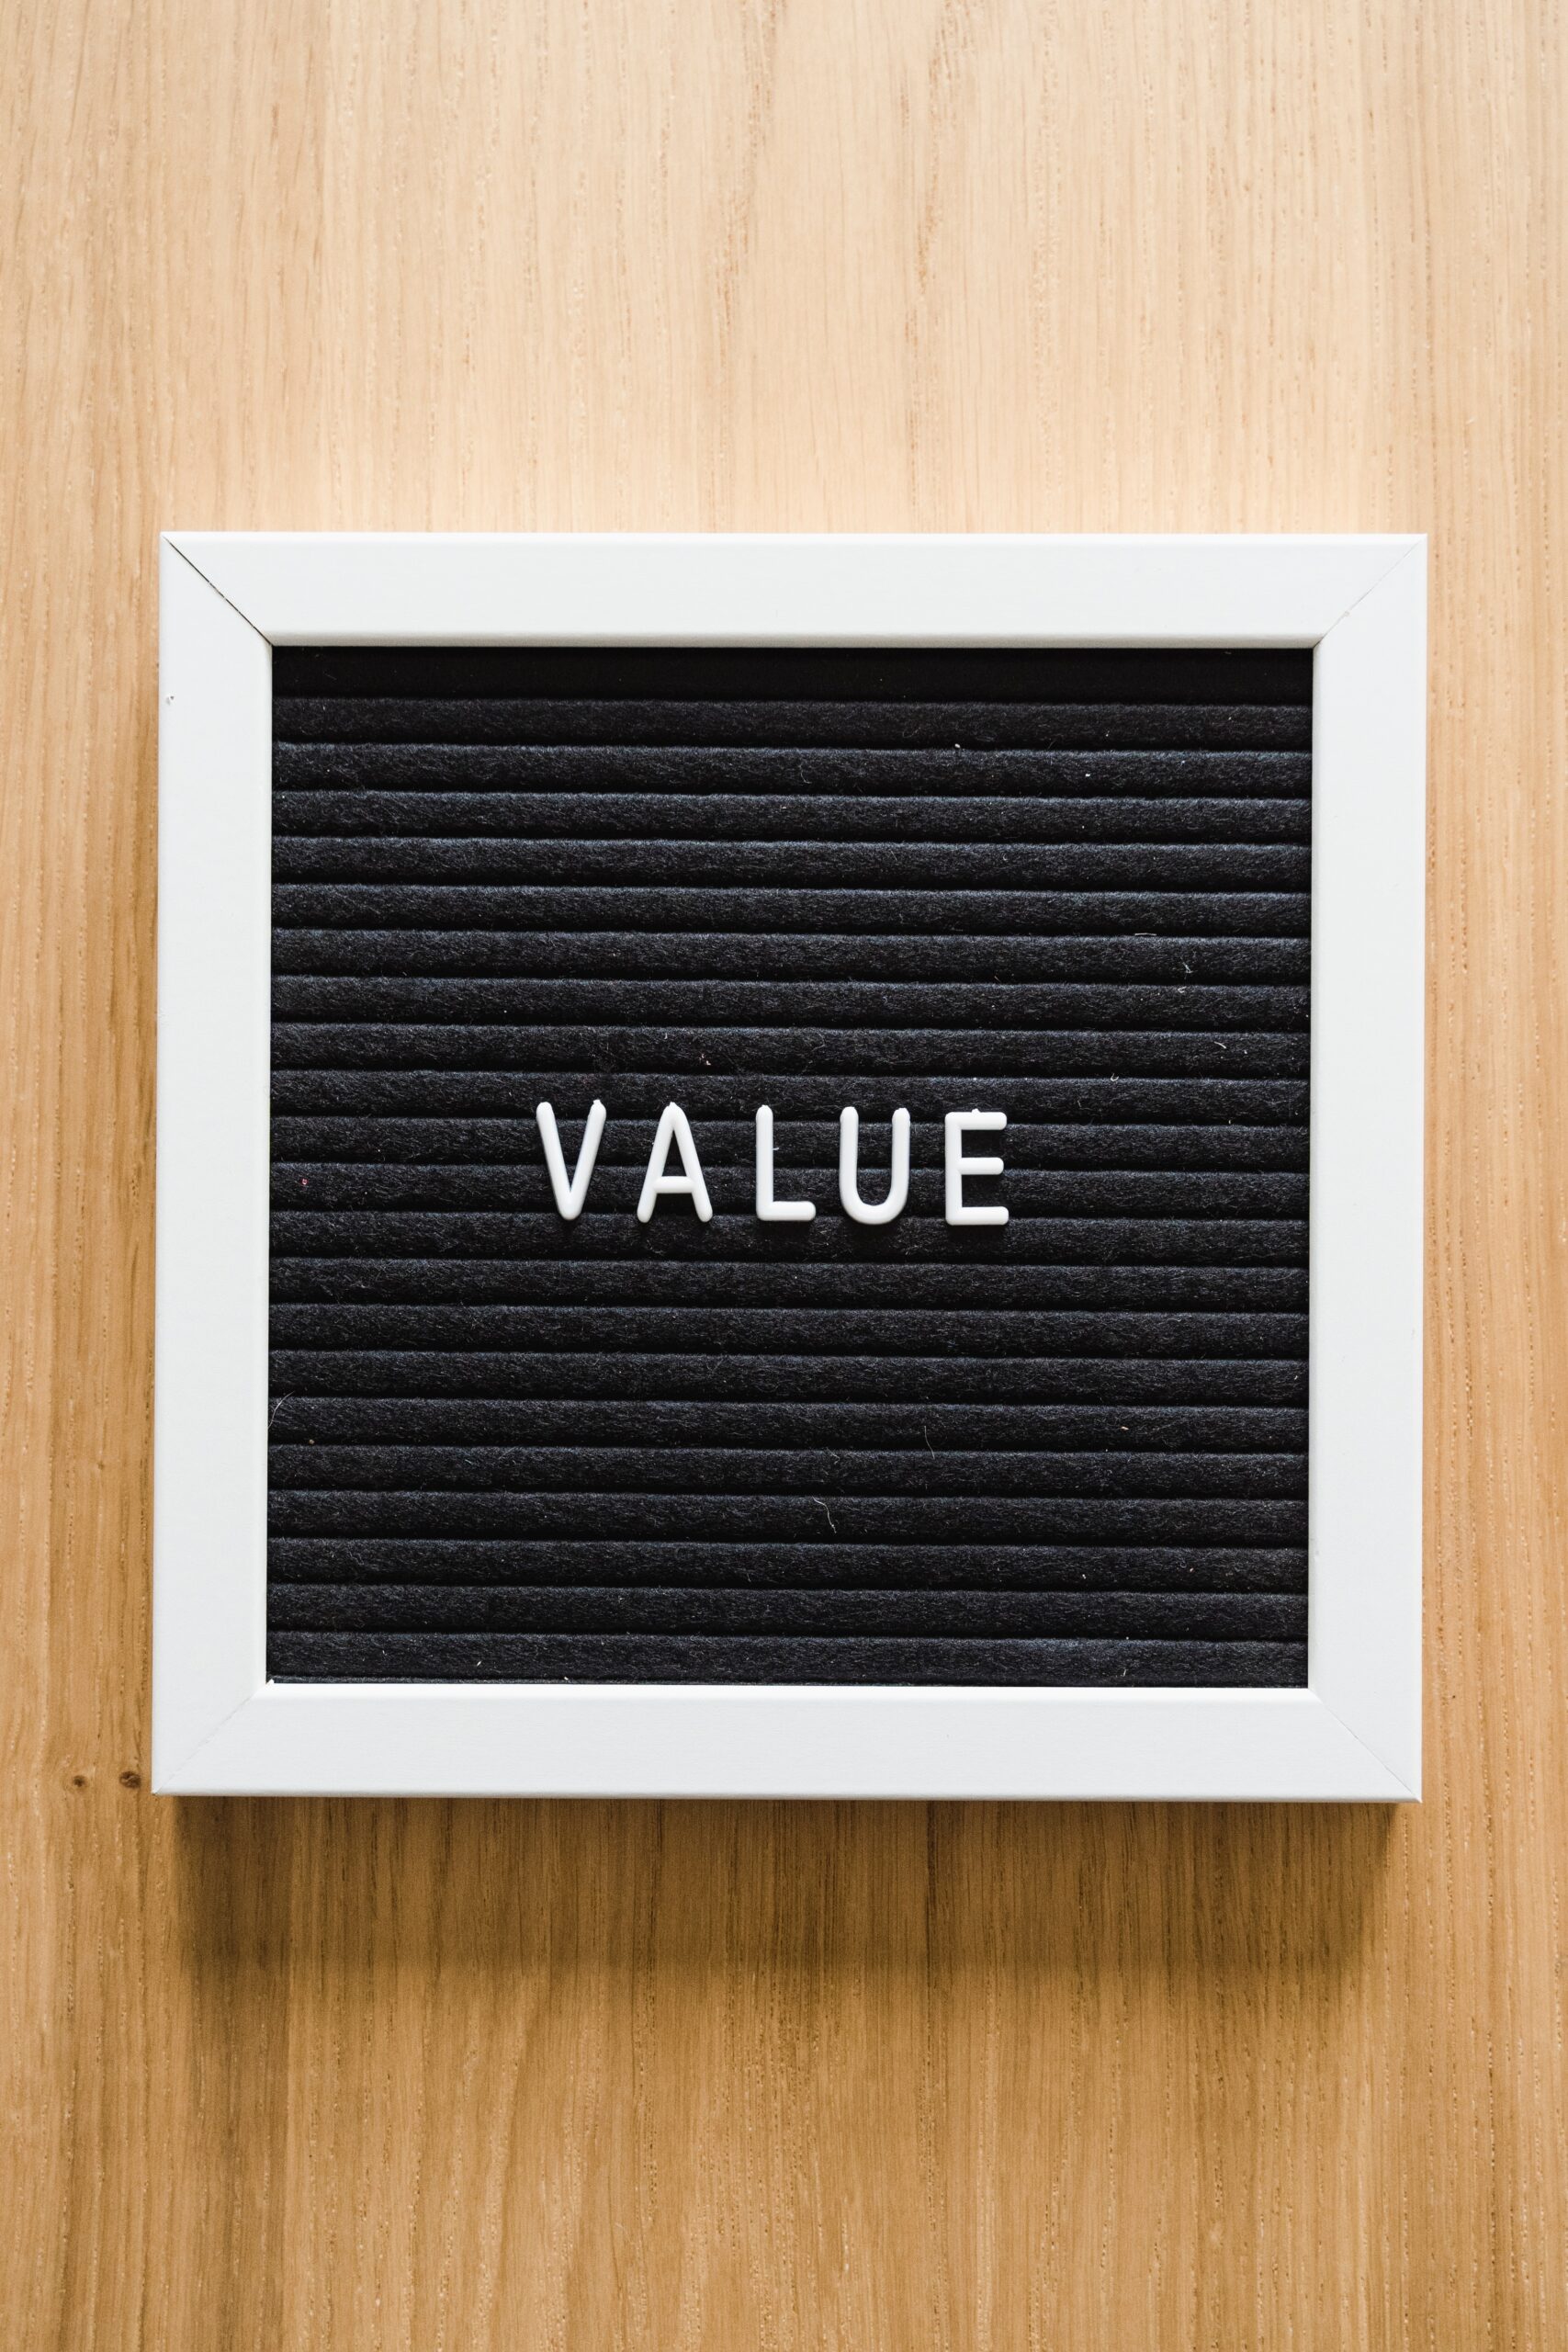 HOW TO SELECT THE OPTIMAL VALUATION TECHNIQUE FOR YOUR STARTUP